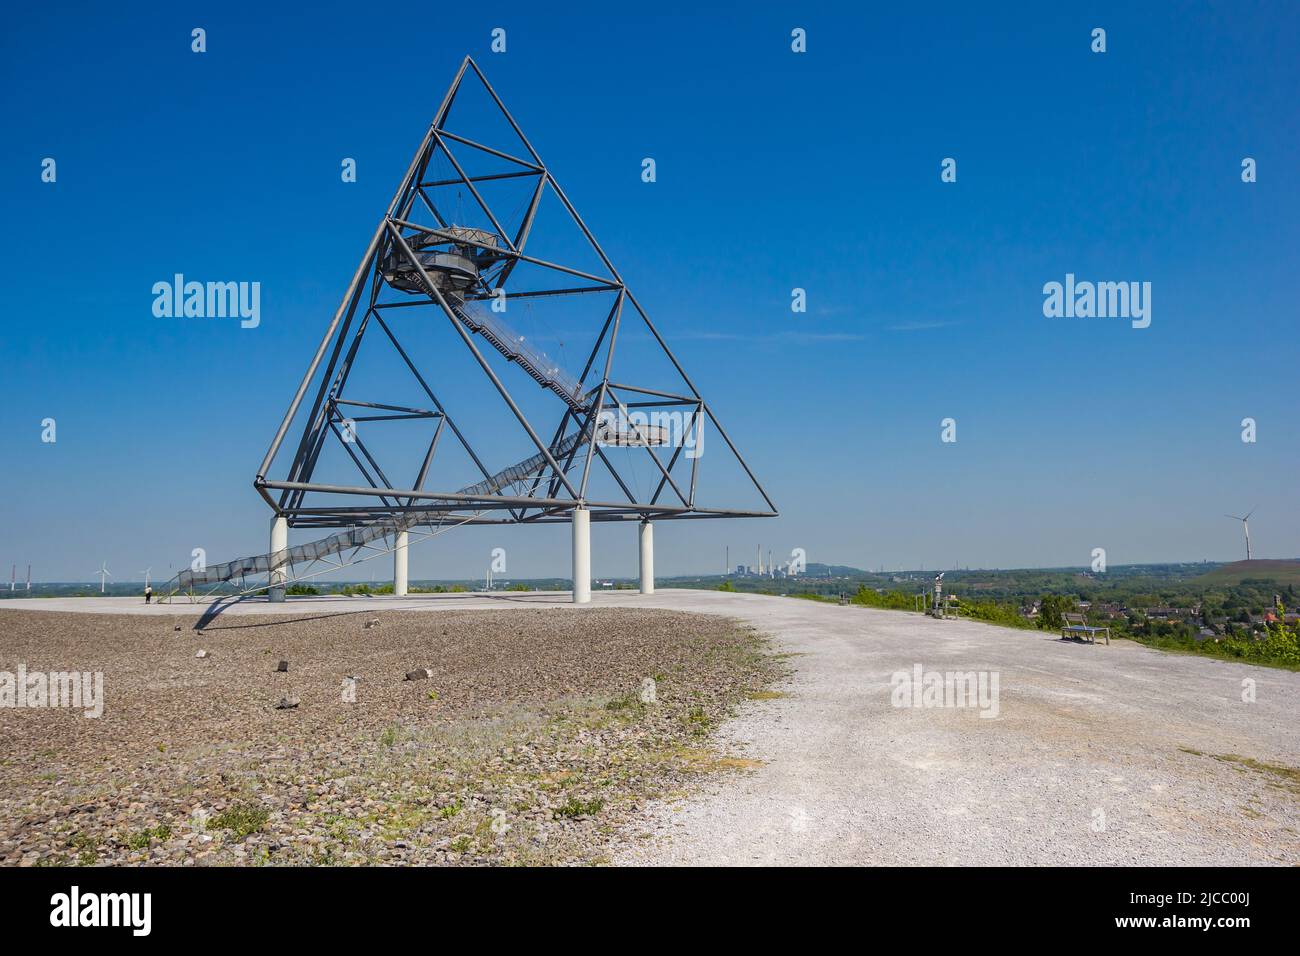 Gravel road leading to the tetrahedron structure in Bottrop, Germany Stock Photo